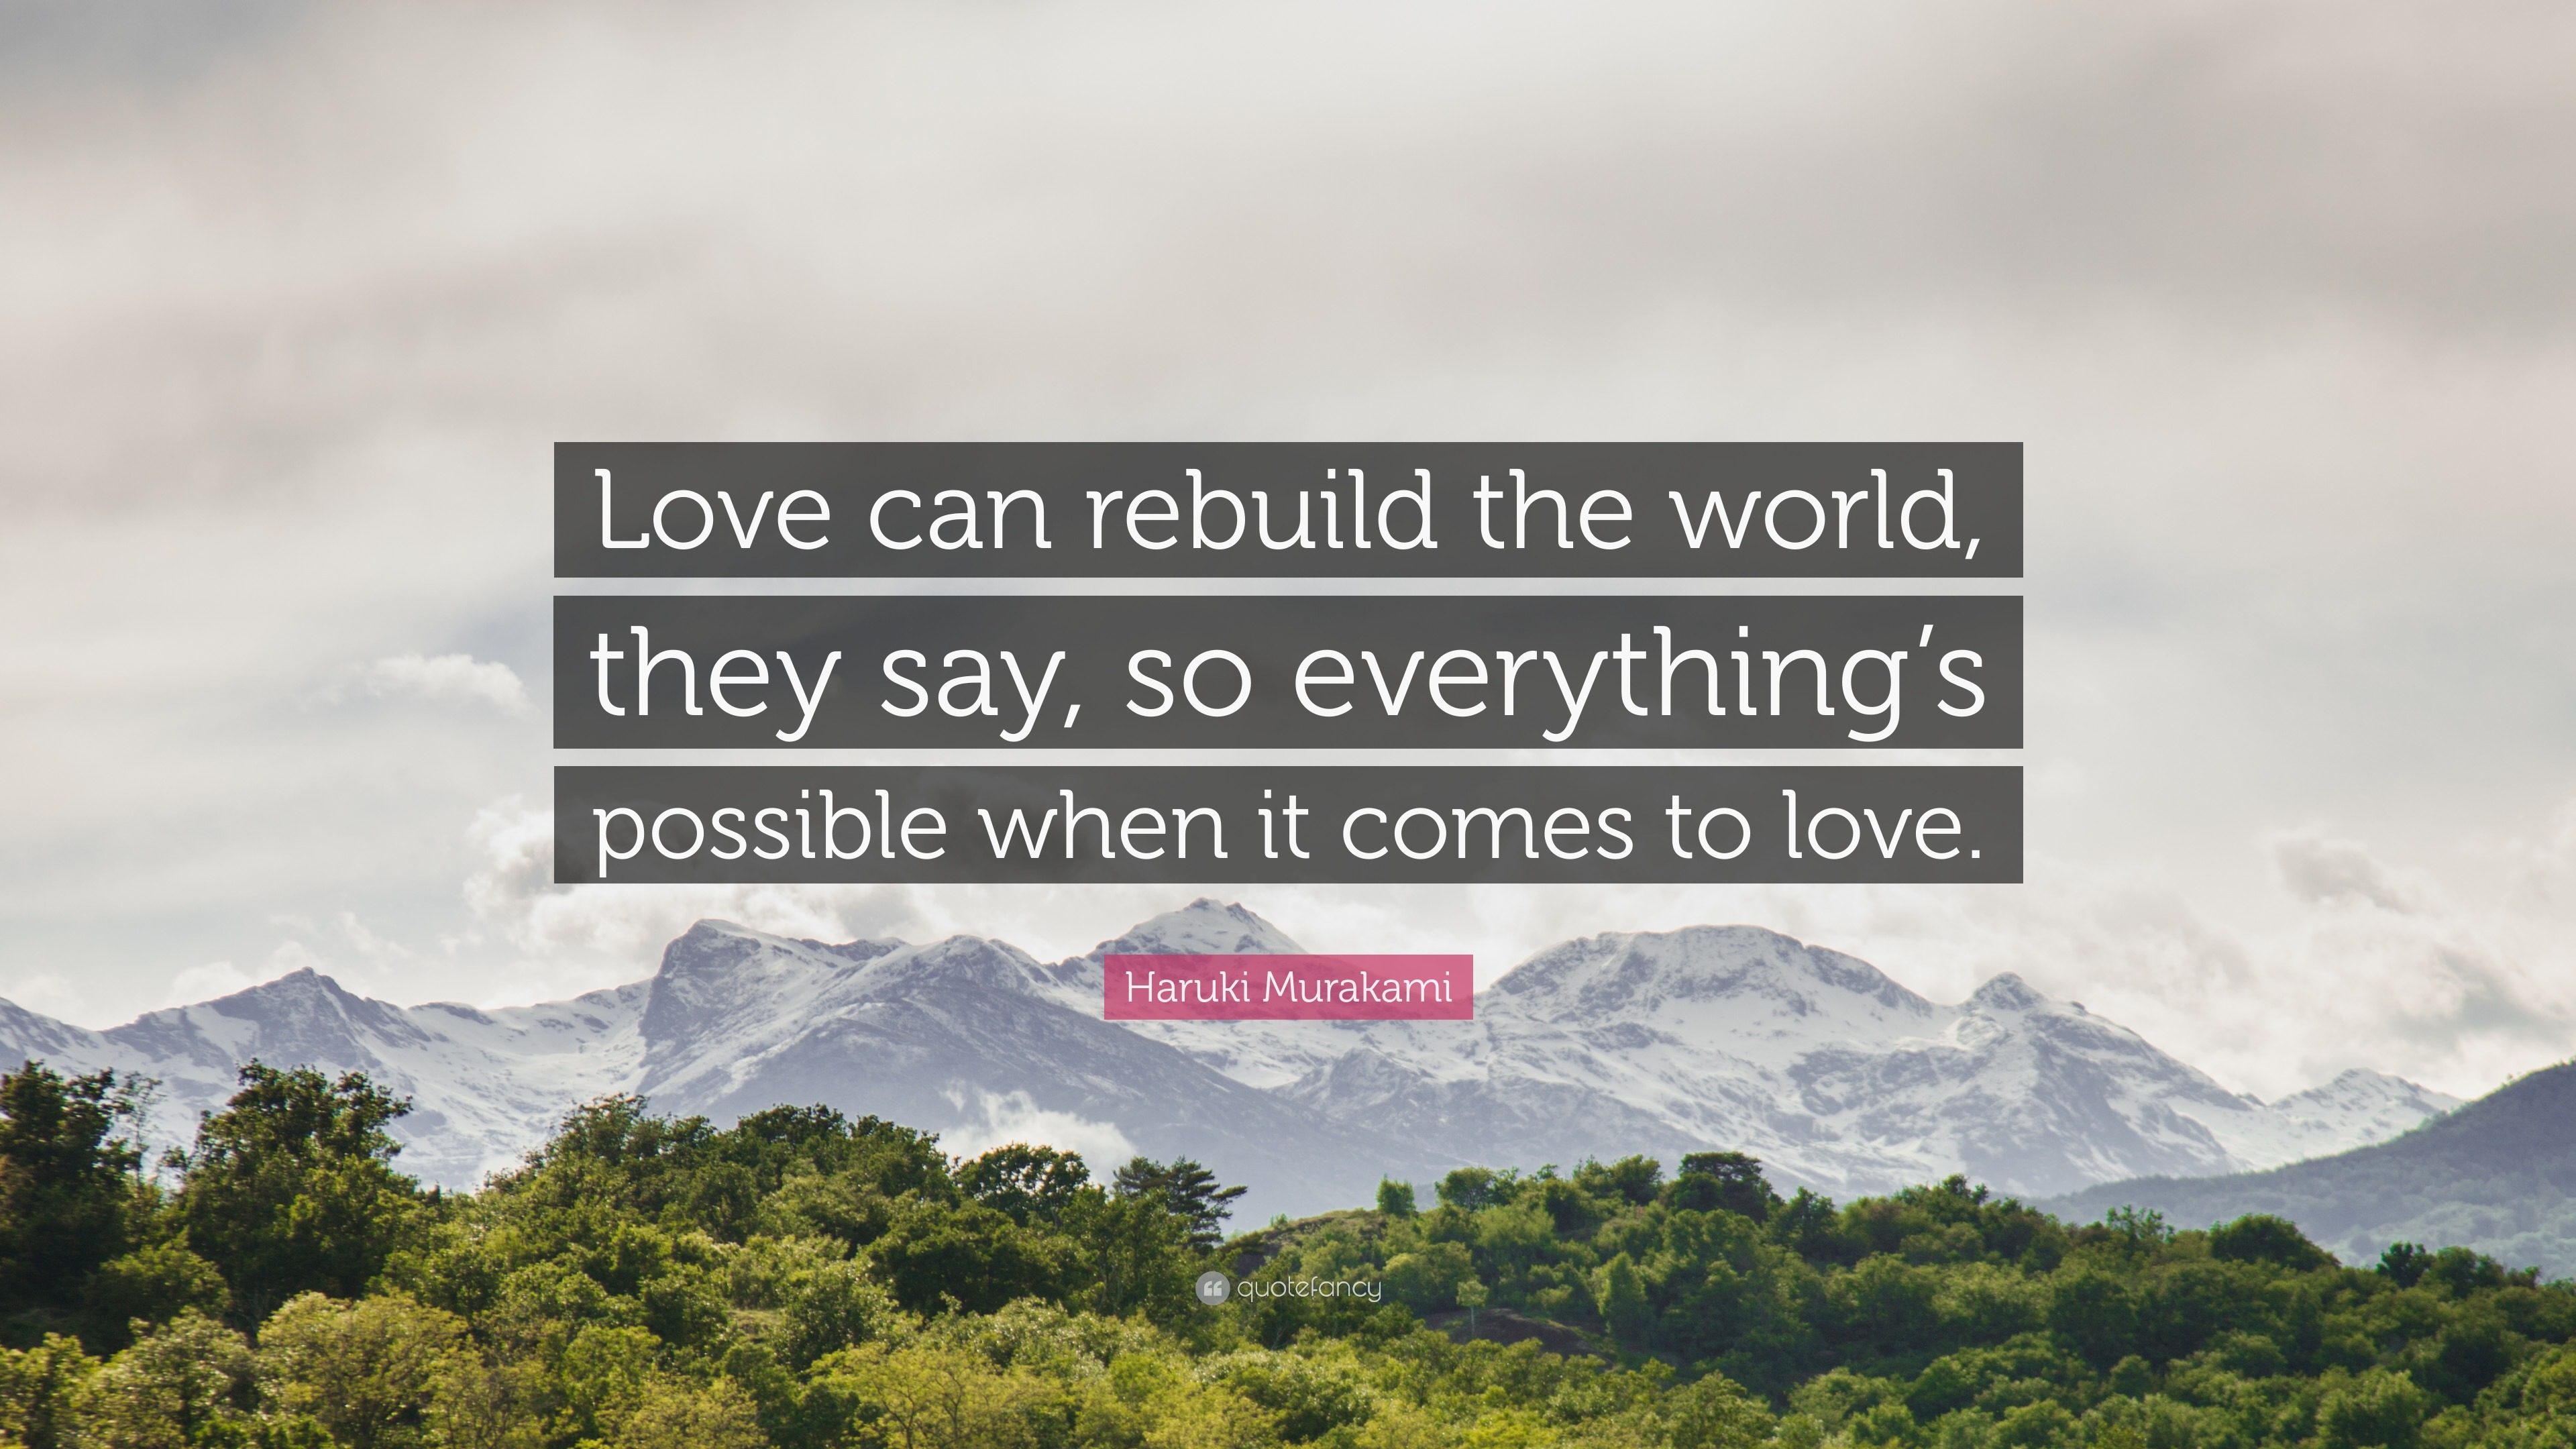 Haruki Murakami Quote “Love can rebuild the world they say so everything s